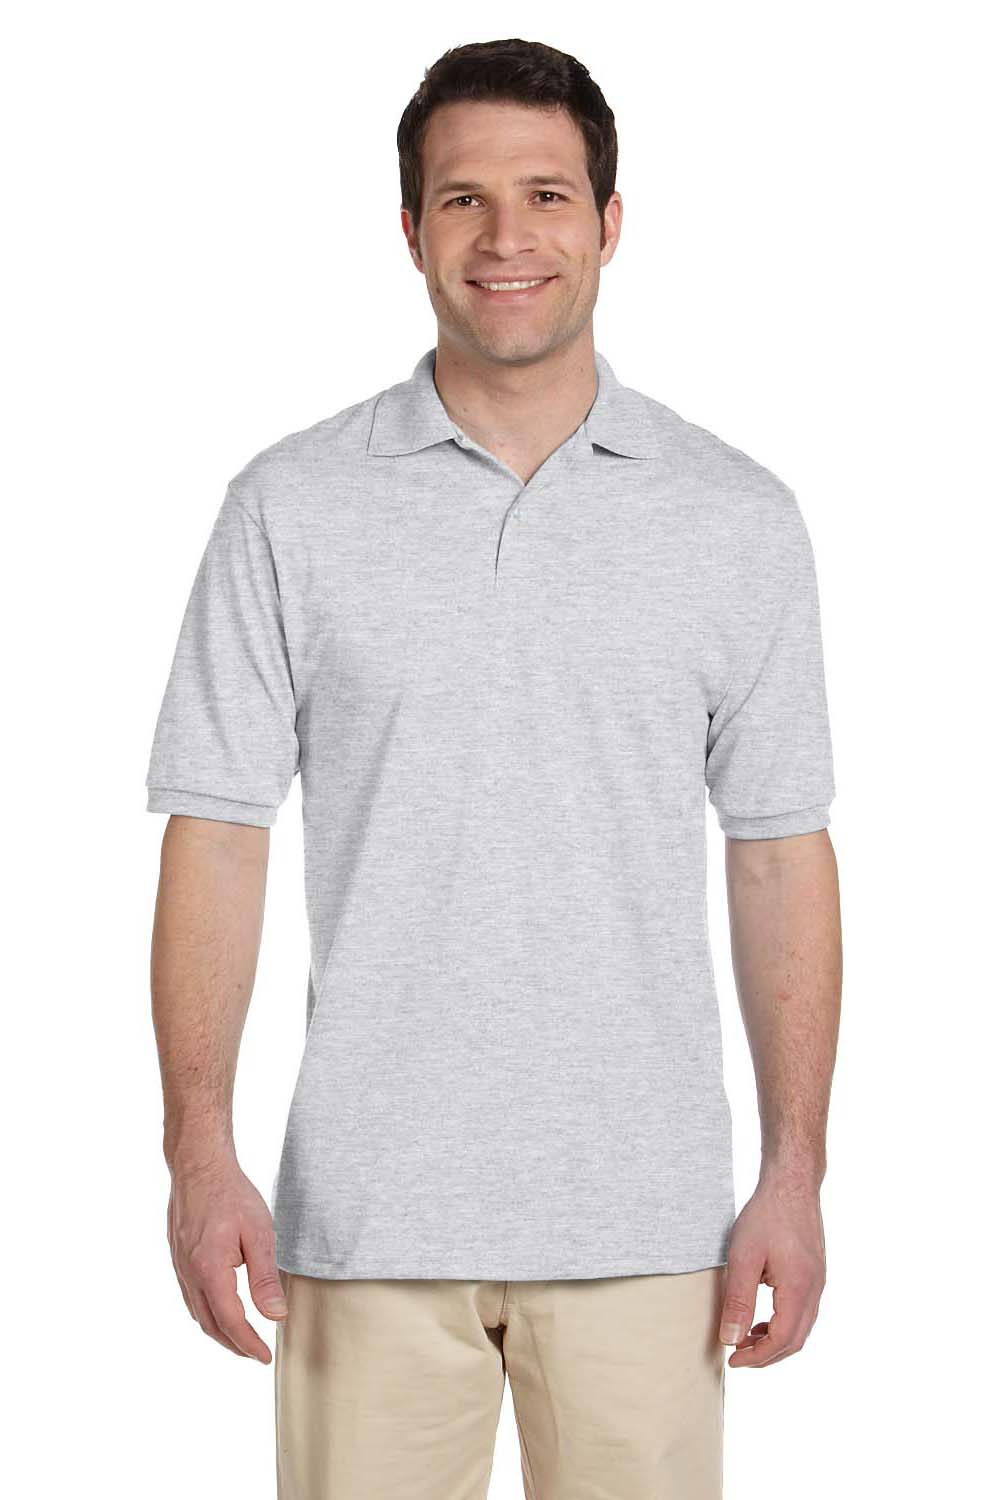 Jerzees 437 Mens SpotShield Stain Resistant Short Sleeve Polo Shirt Ash Grey Front